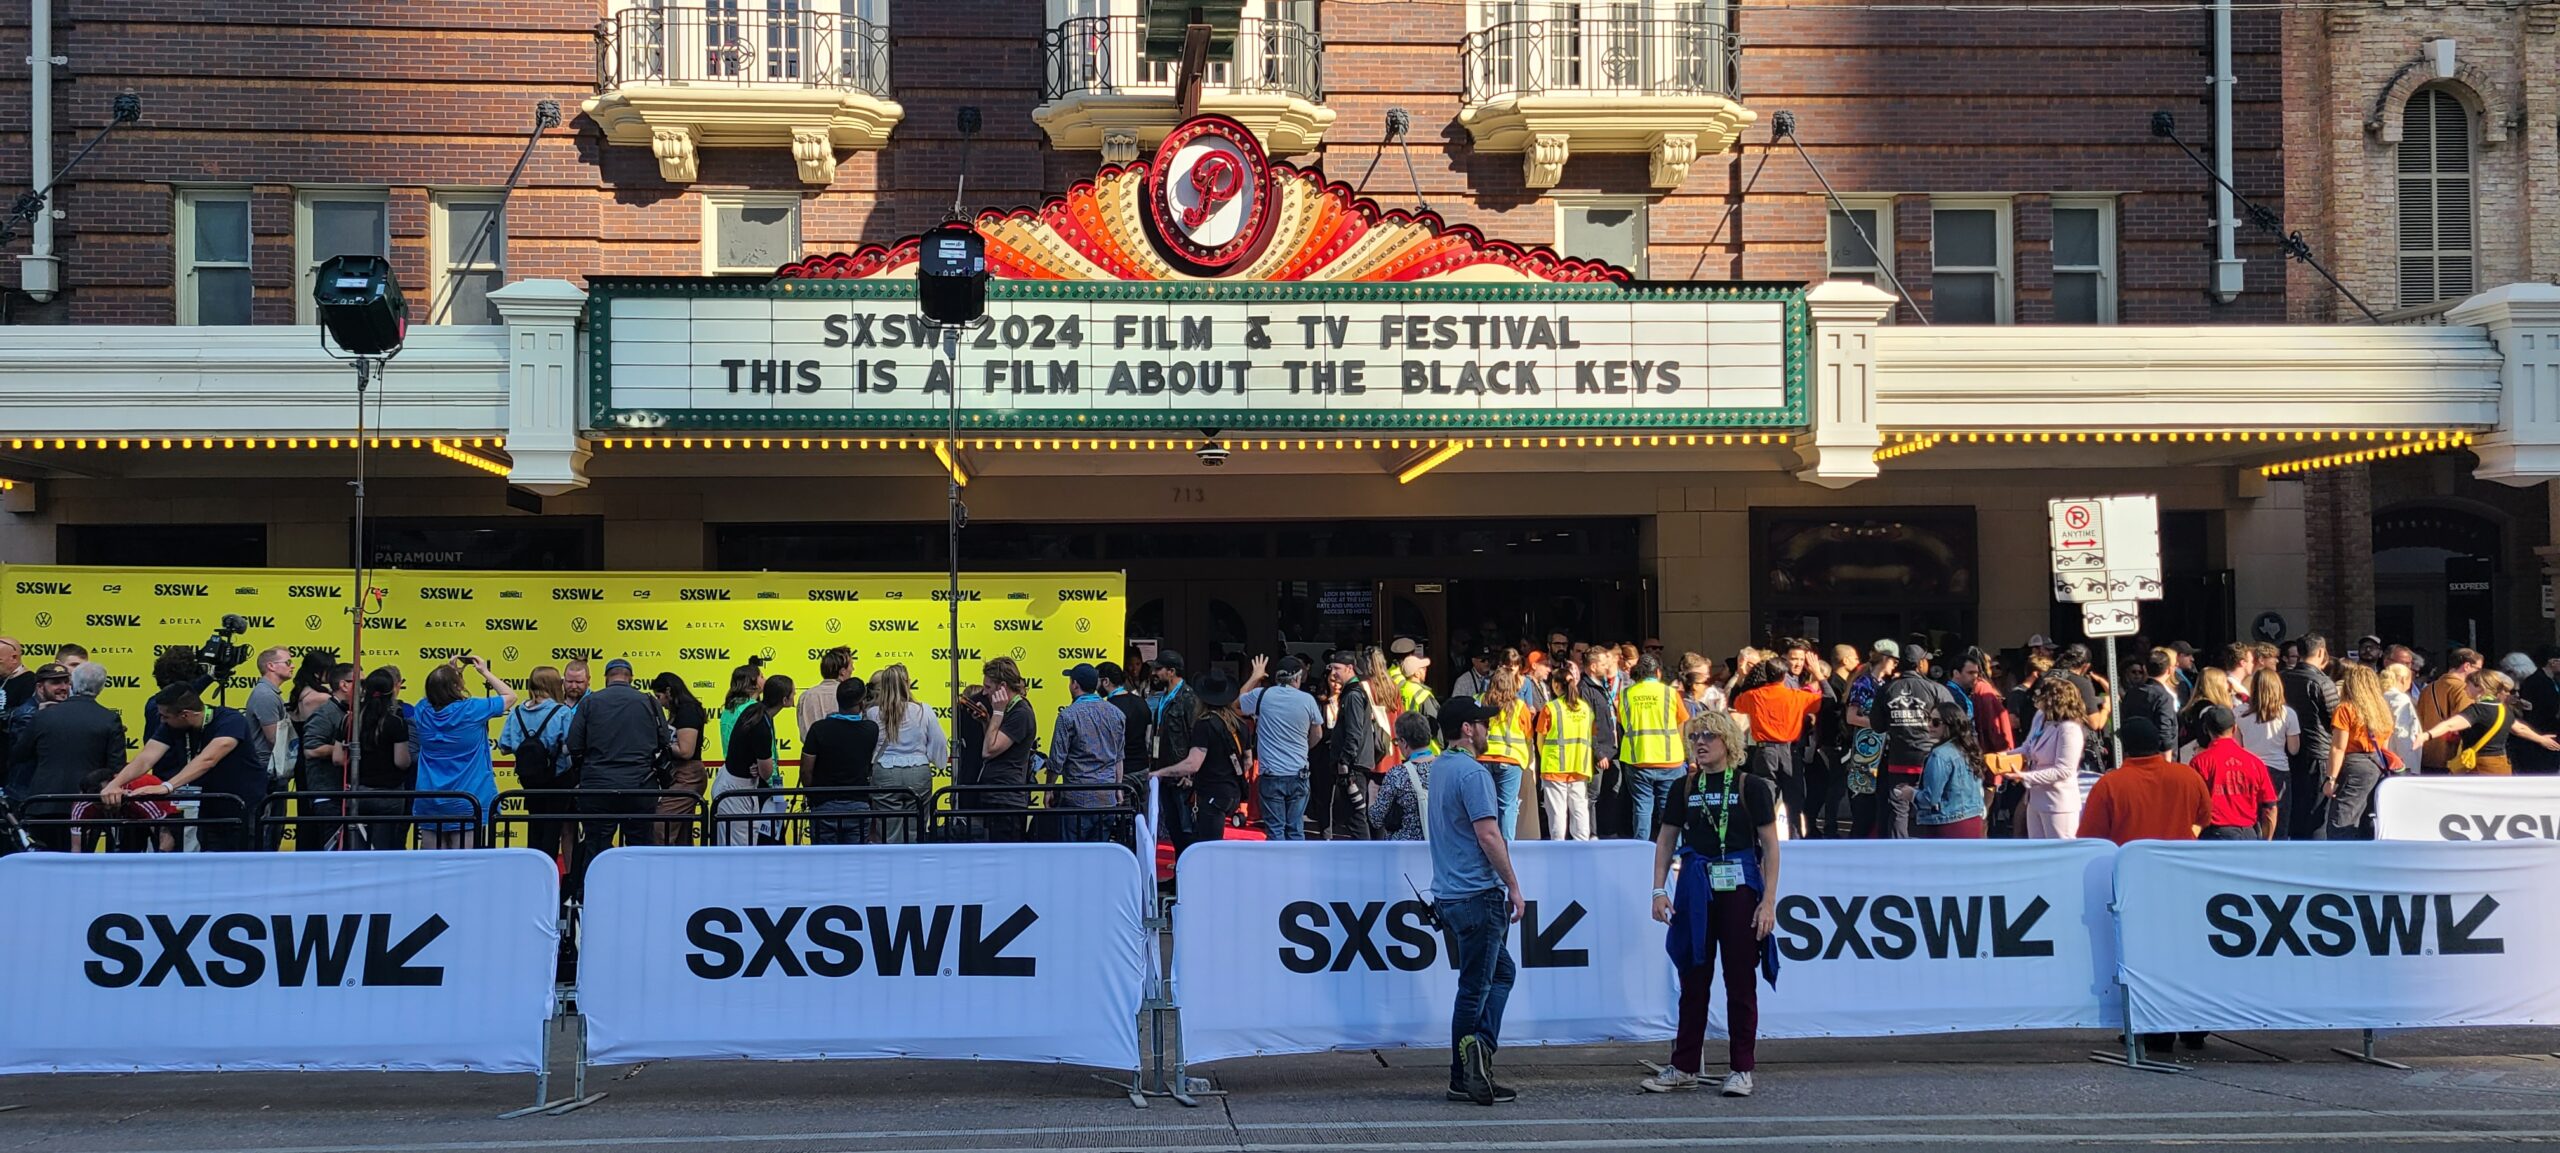 SXSW 2024 - This is a Film About The Black Keys